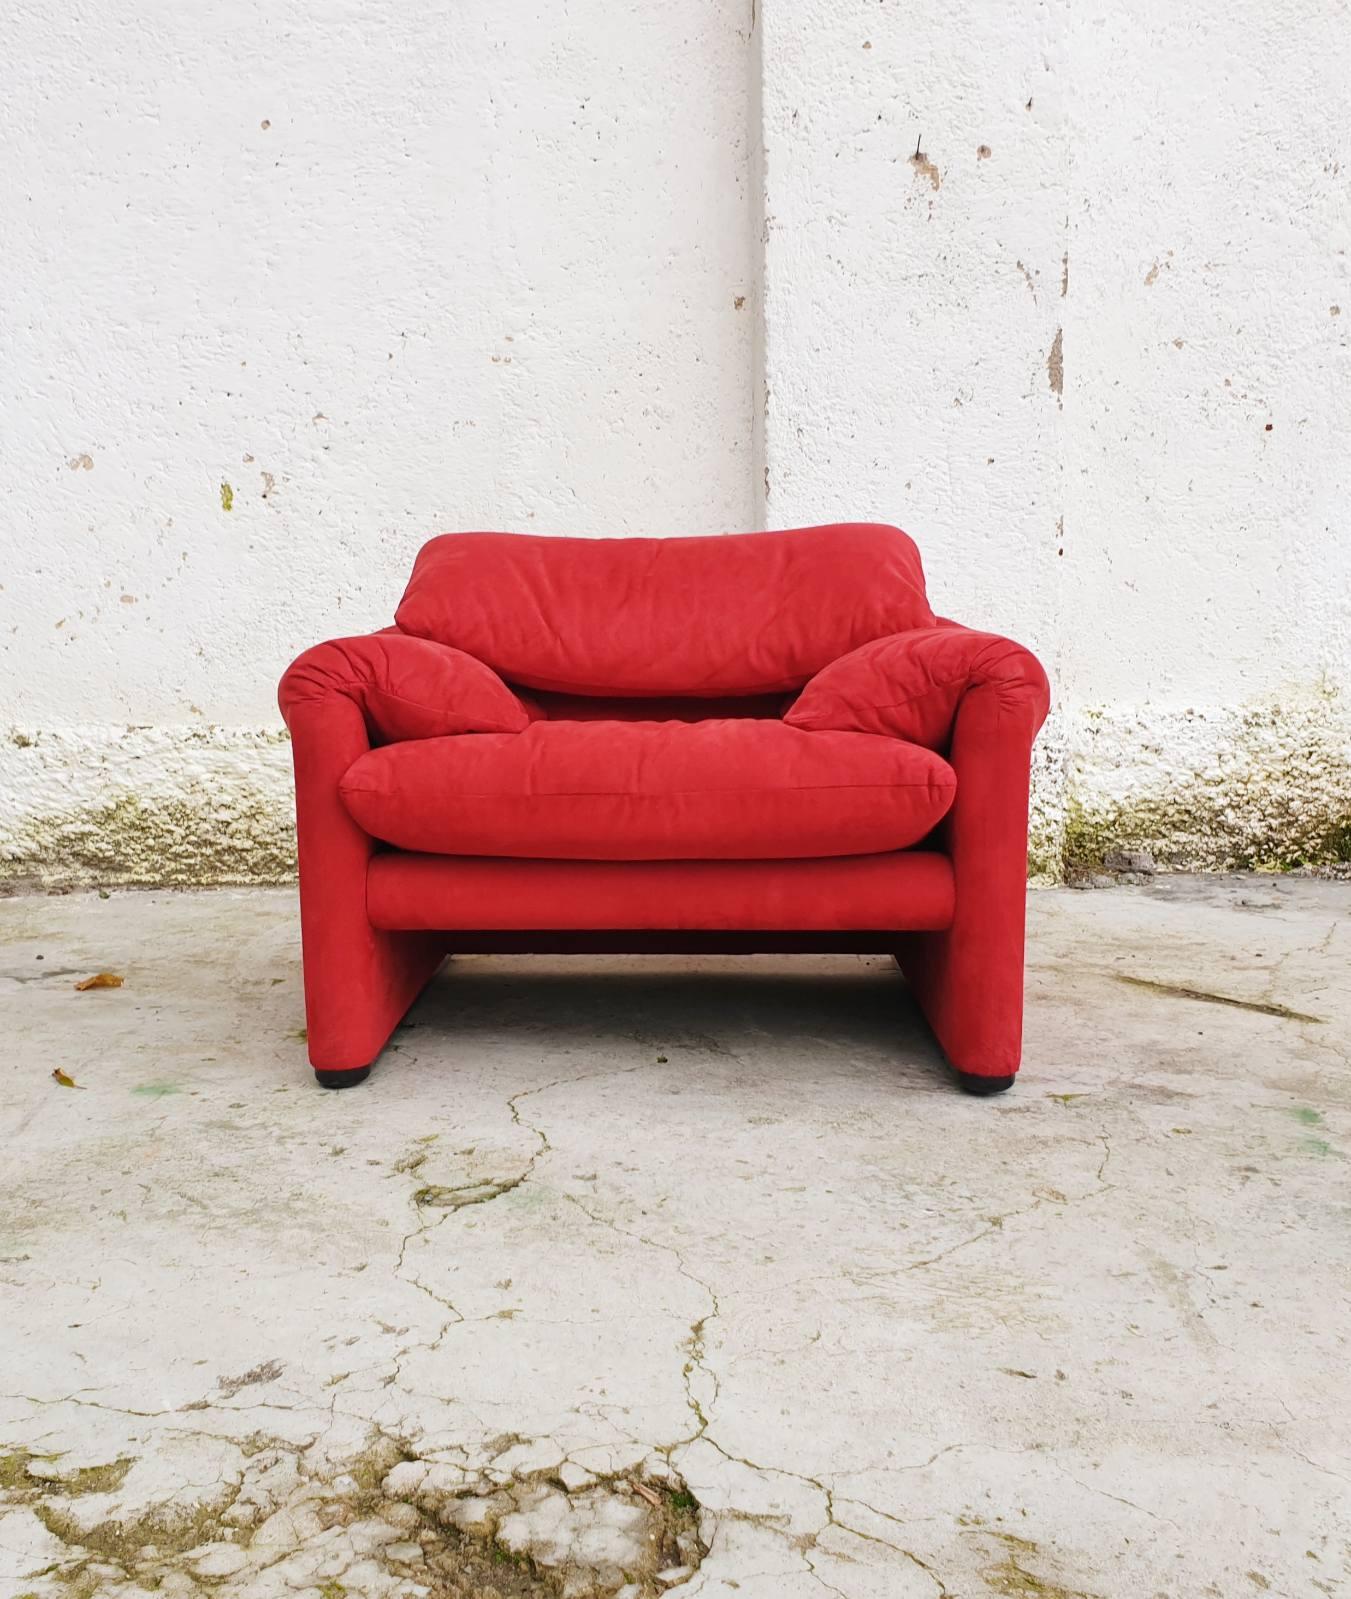 A set of lounge chair with ottoman Maralunga designed by Vico Magistretti and produce by Cassina in Italy in the 70s
Perfect conditions
Red alcantara fabric